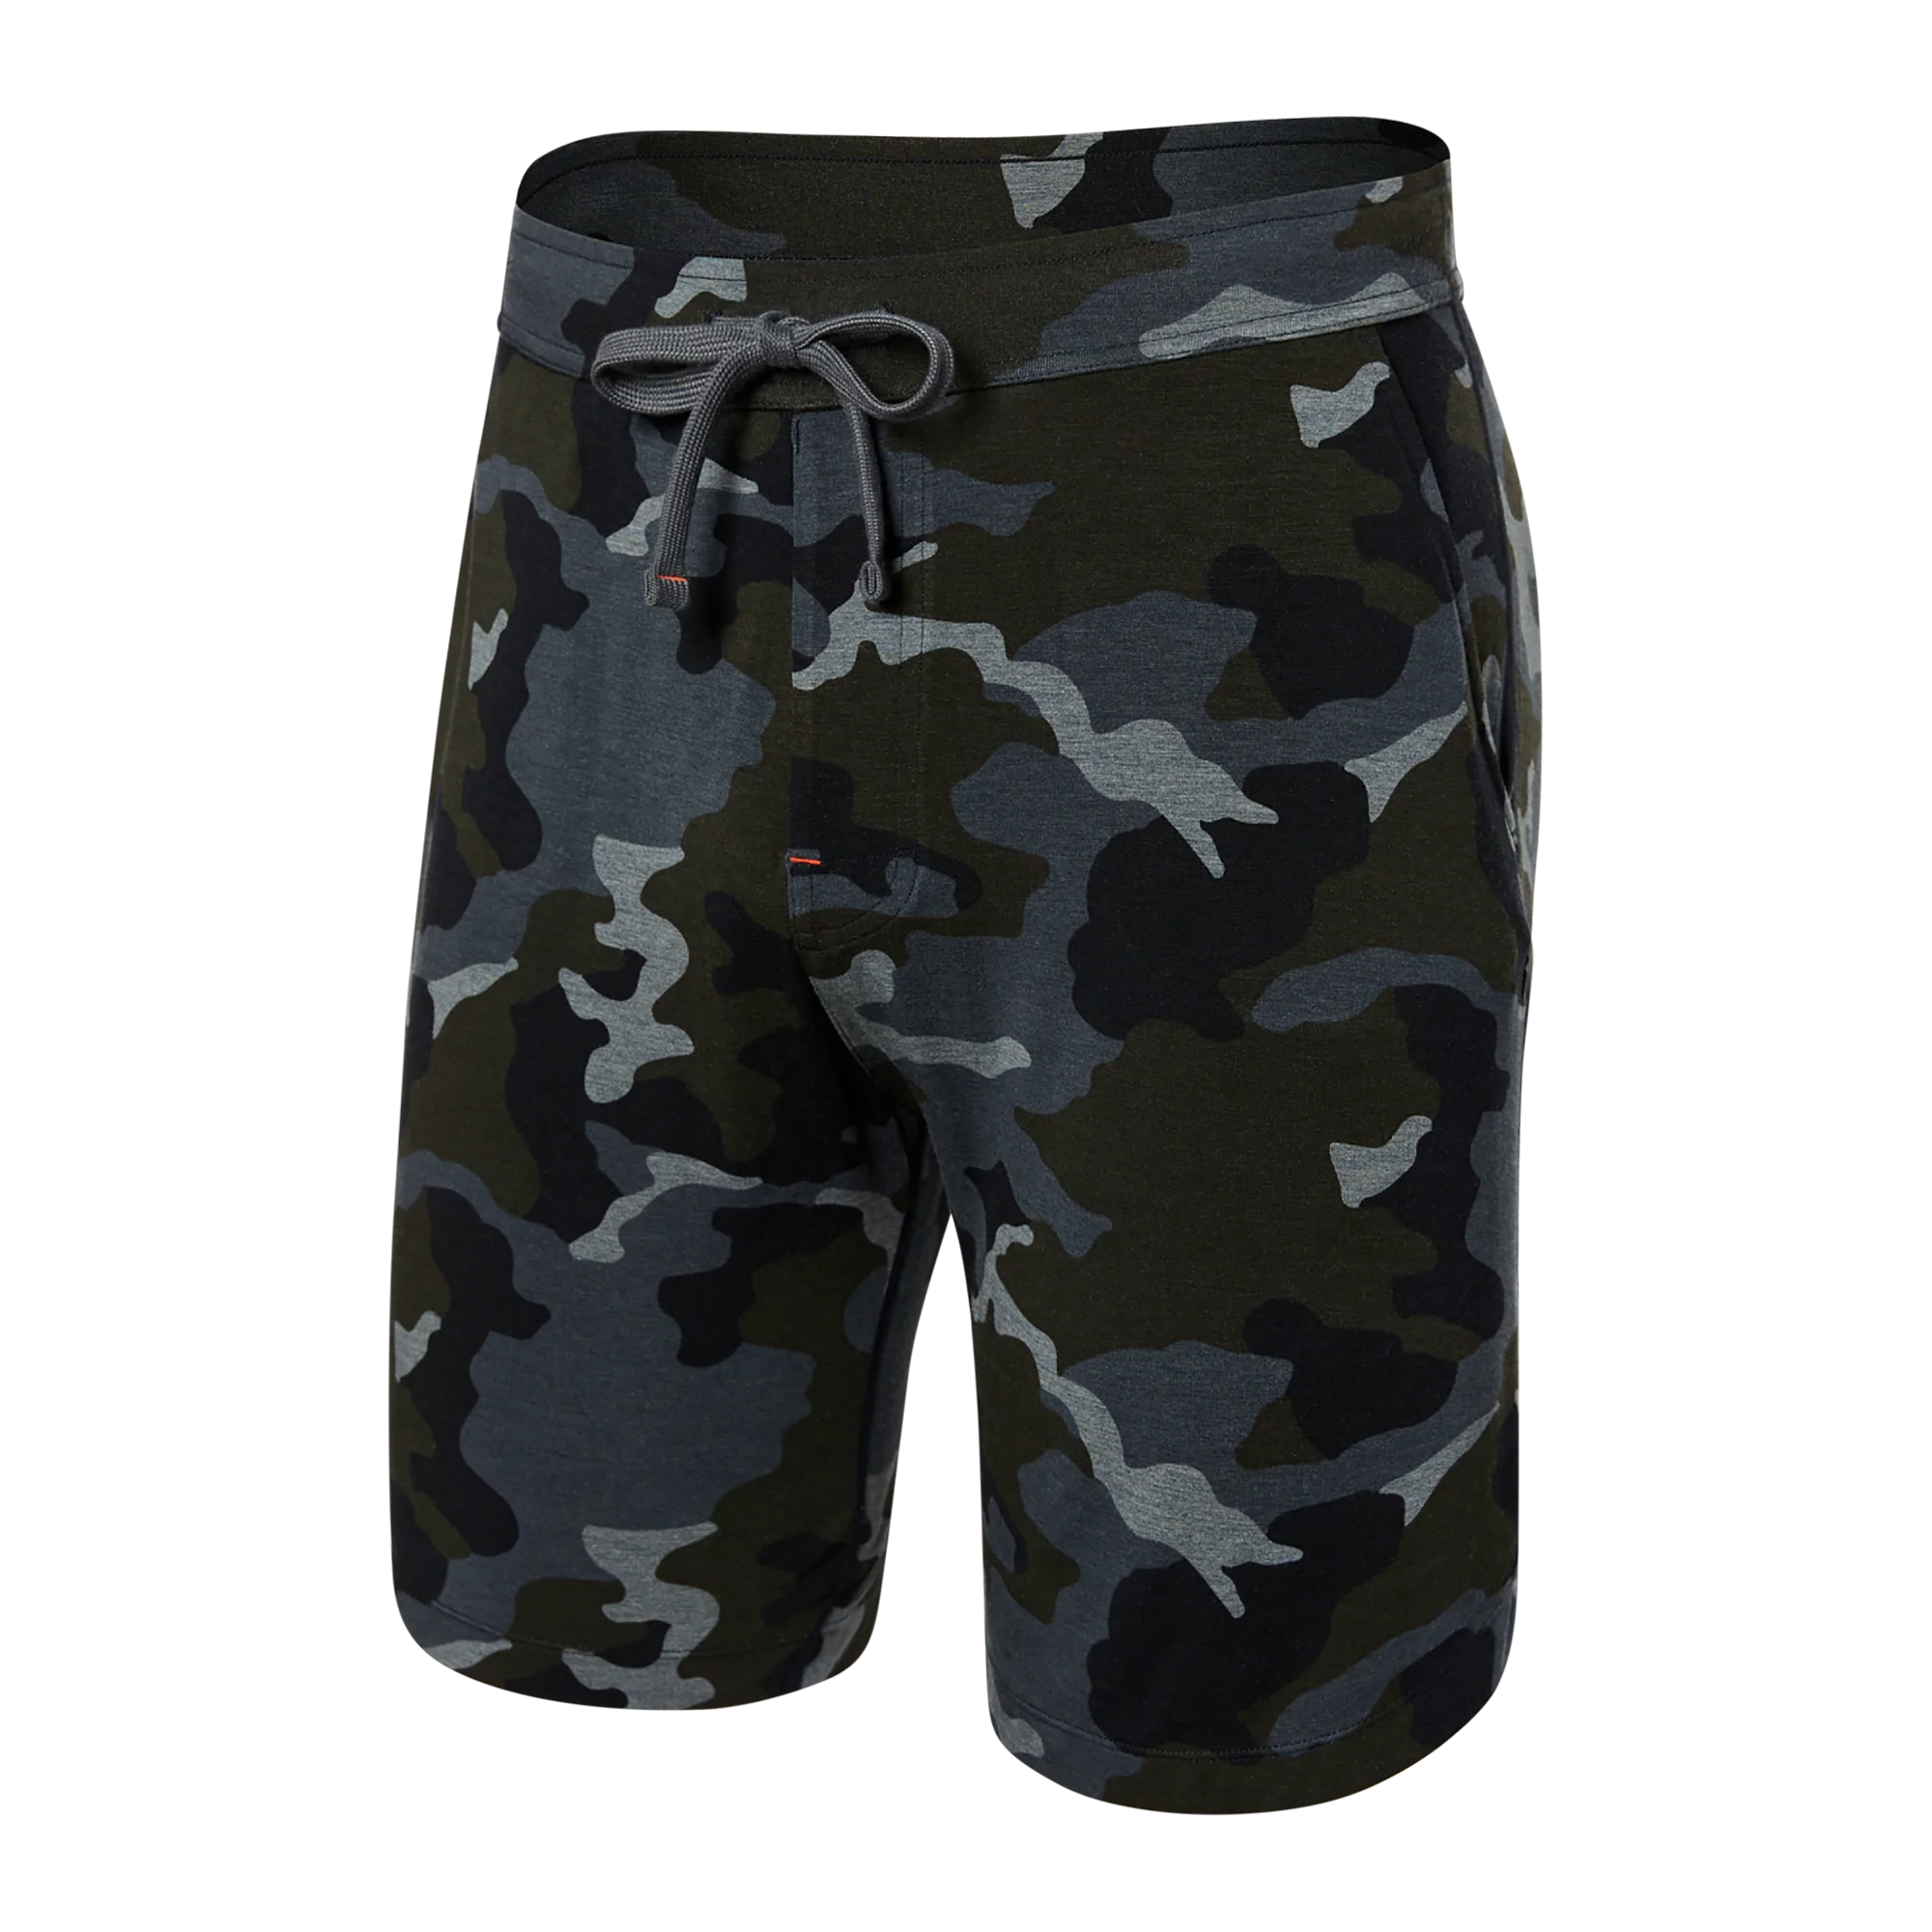 Front of Snooze Sleep Short in Supersize Camo- Graphite